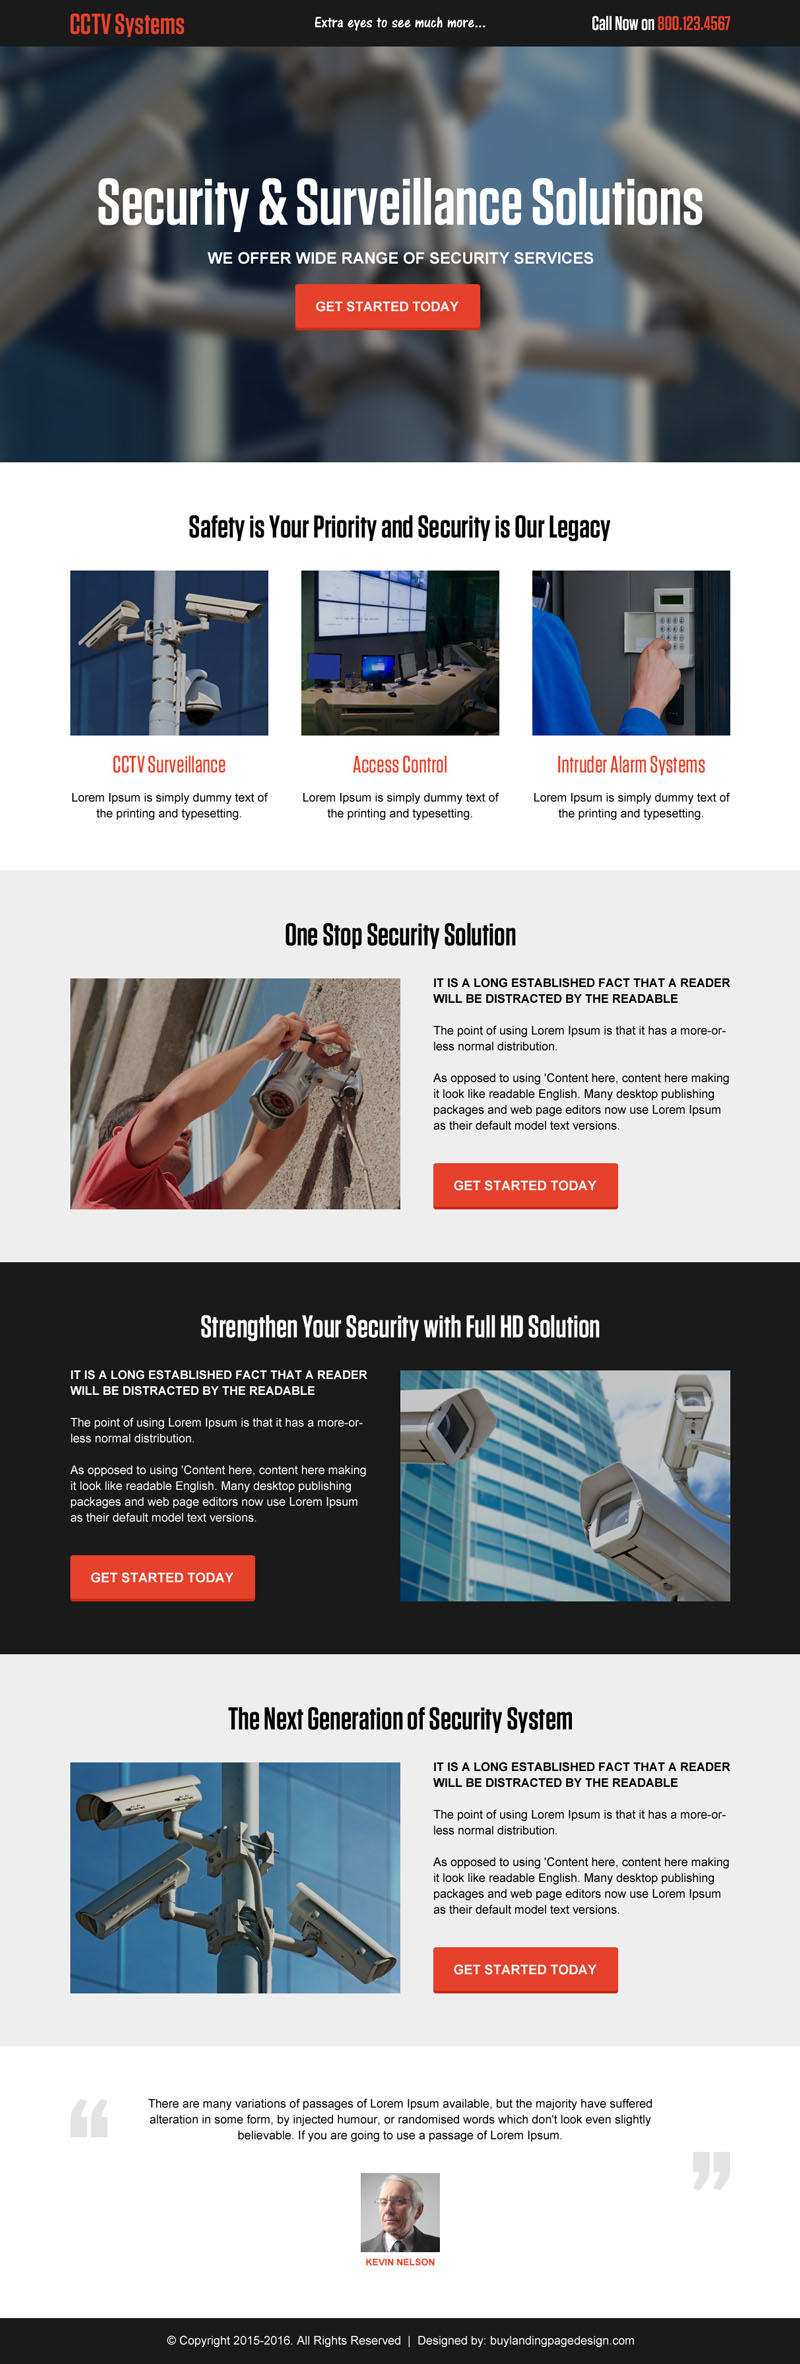 cctv-security-system-and-surveillance-solutions-cta-landing-page-design-005